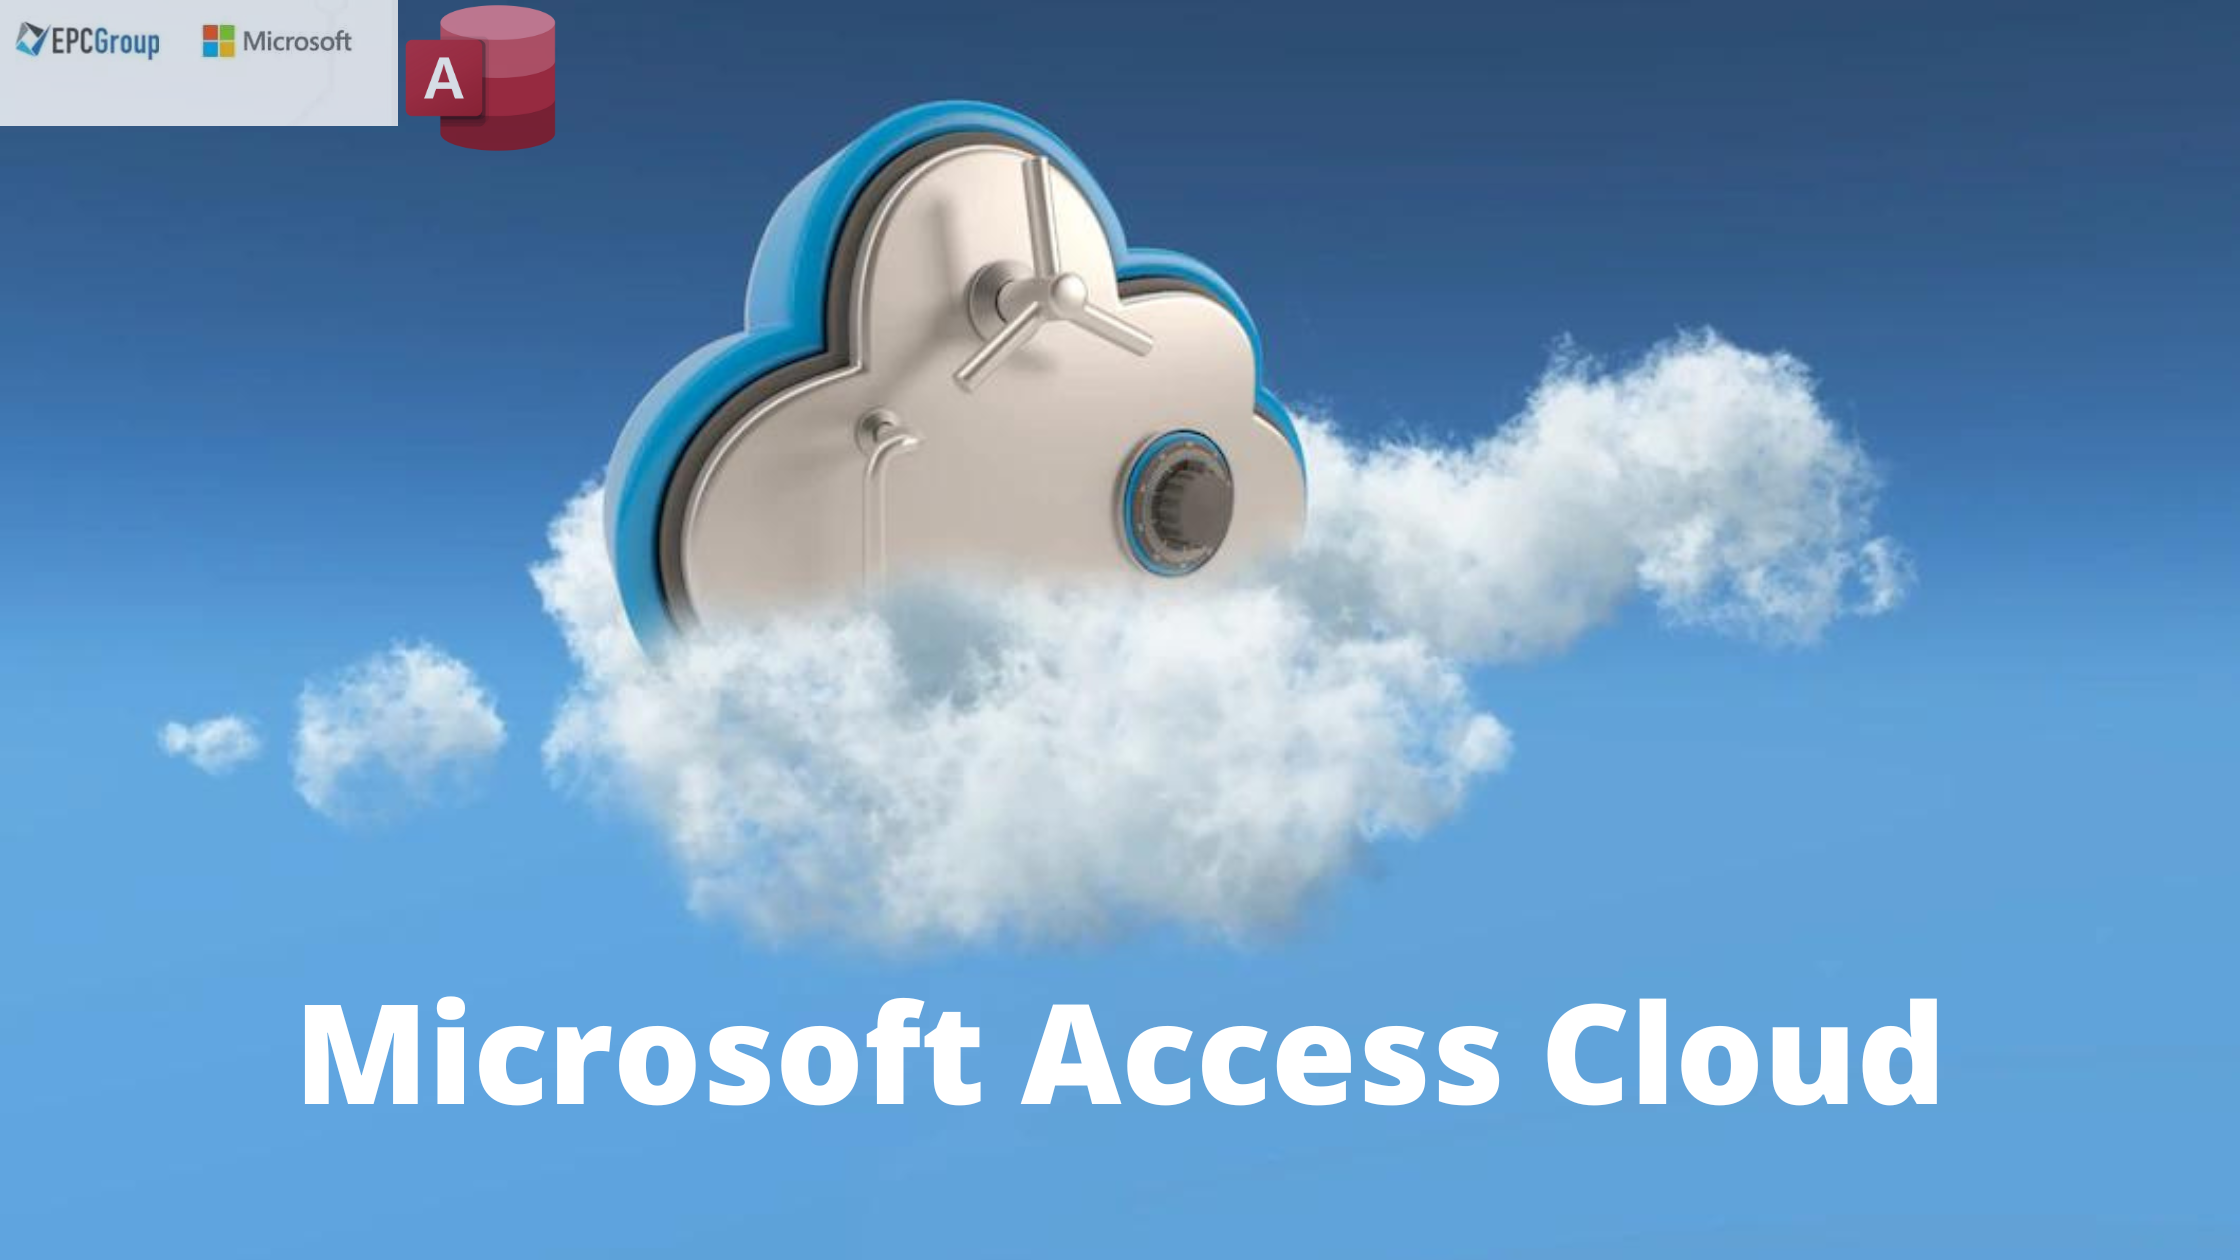 Microsoft Access Cloud: More Than Just File Storage